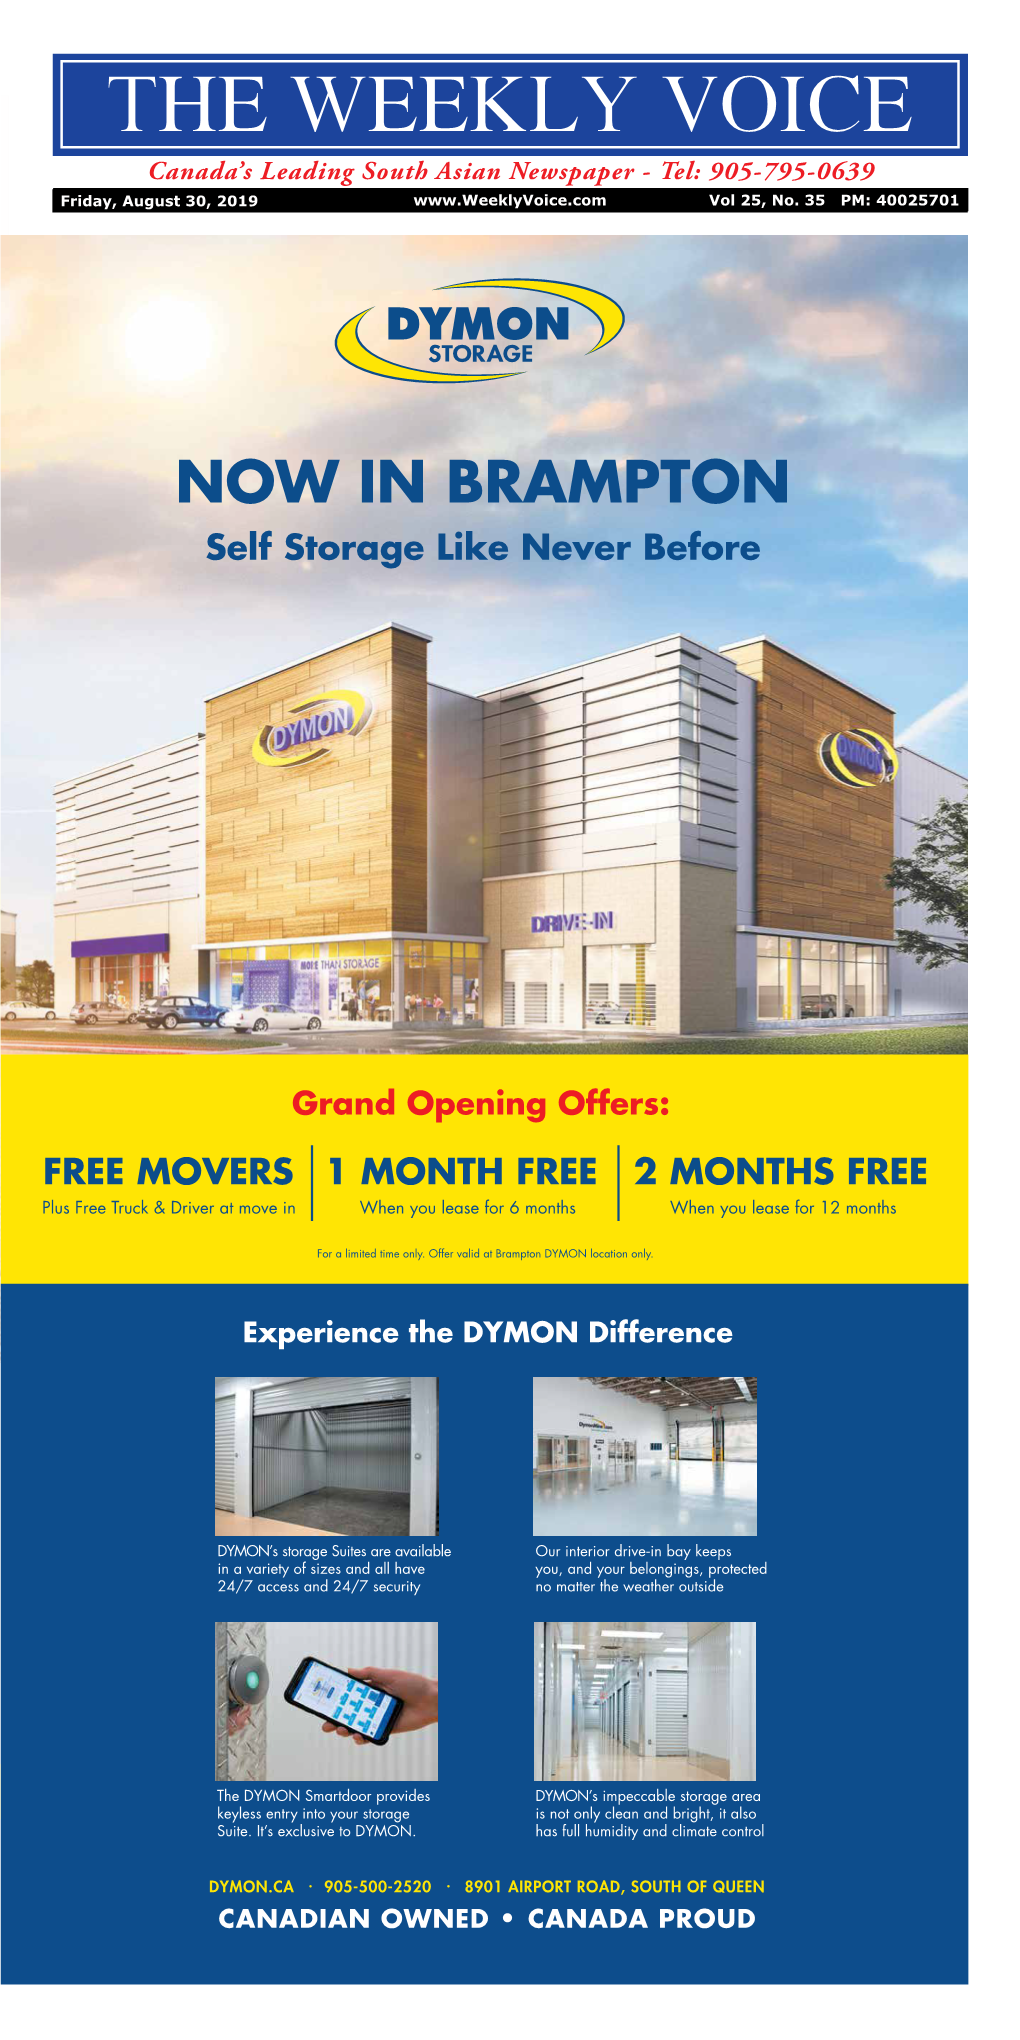 NOW in BRAMPTON INTRODUCING OUR DYMON STORE OVER 1500 WAYS to GET STYLISHLY ORGANIZED Self Storage Like Never Before